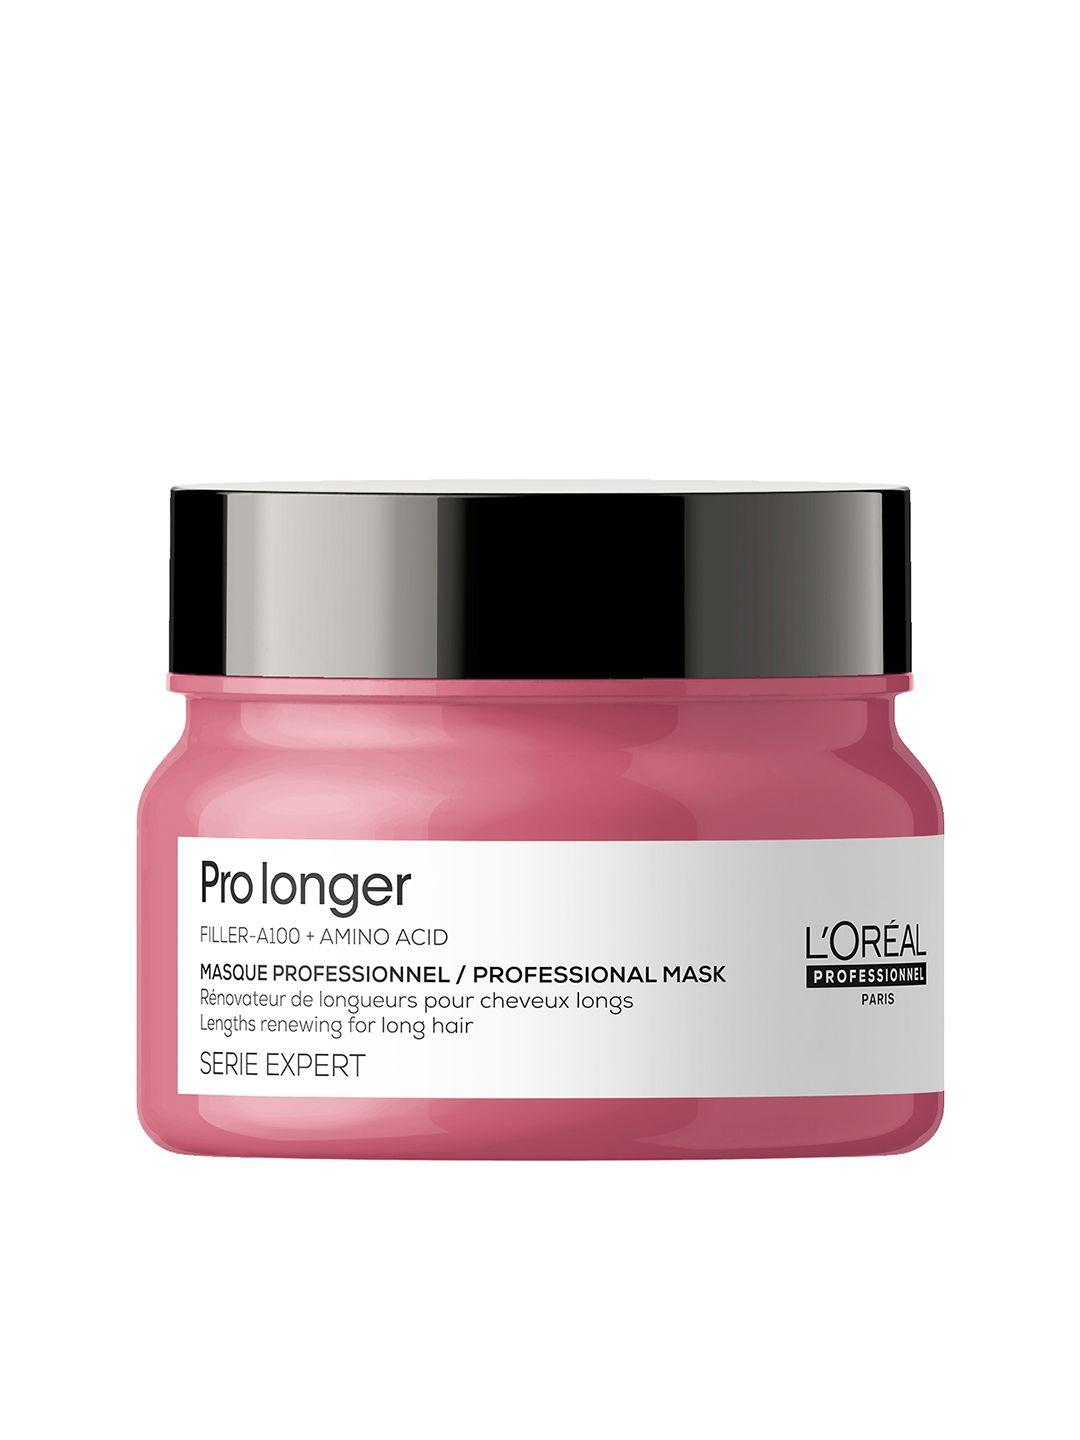 loreal-professionnel-pro-longer-hair-mask-with-amino-acids-for-thin-hair-ends-200g